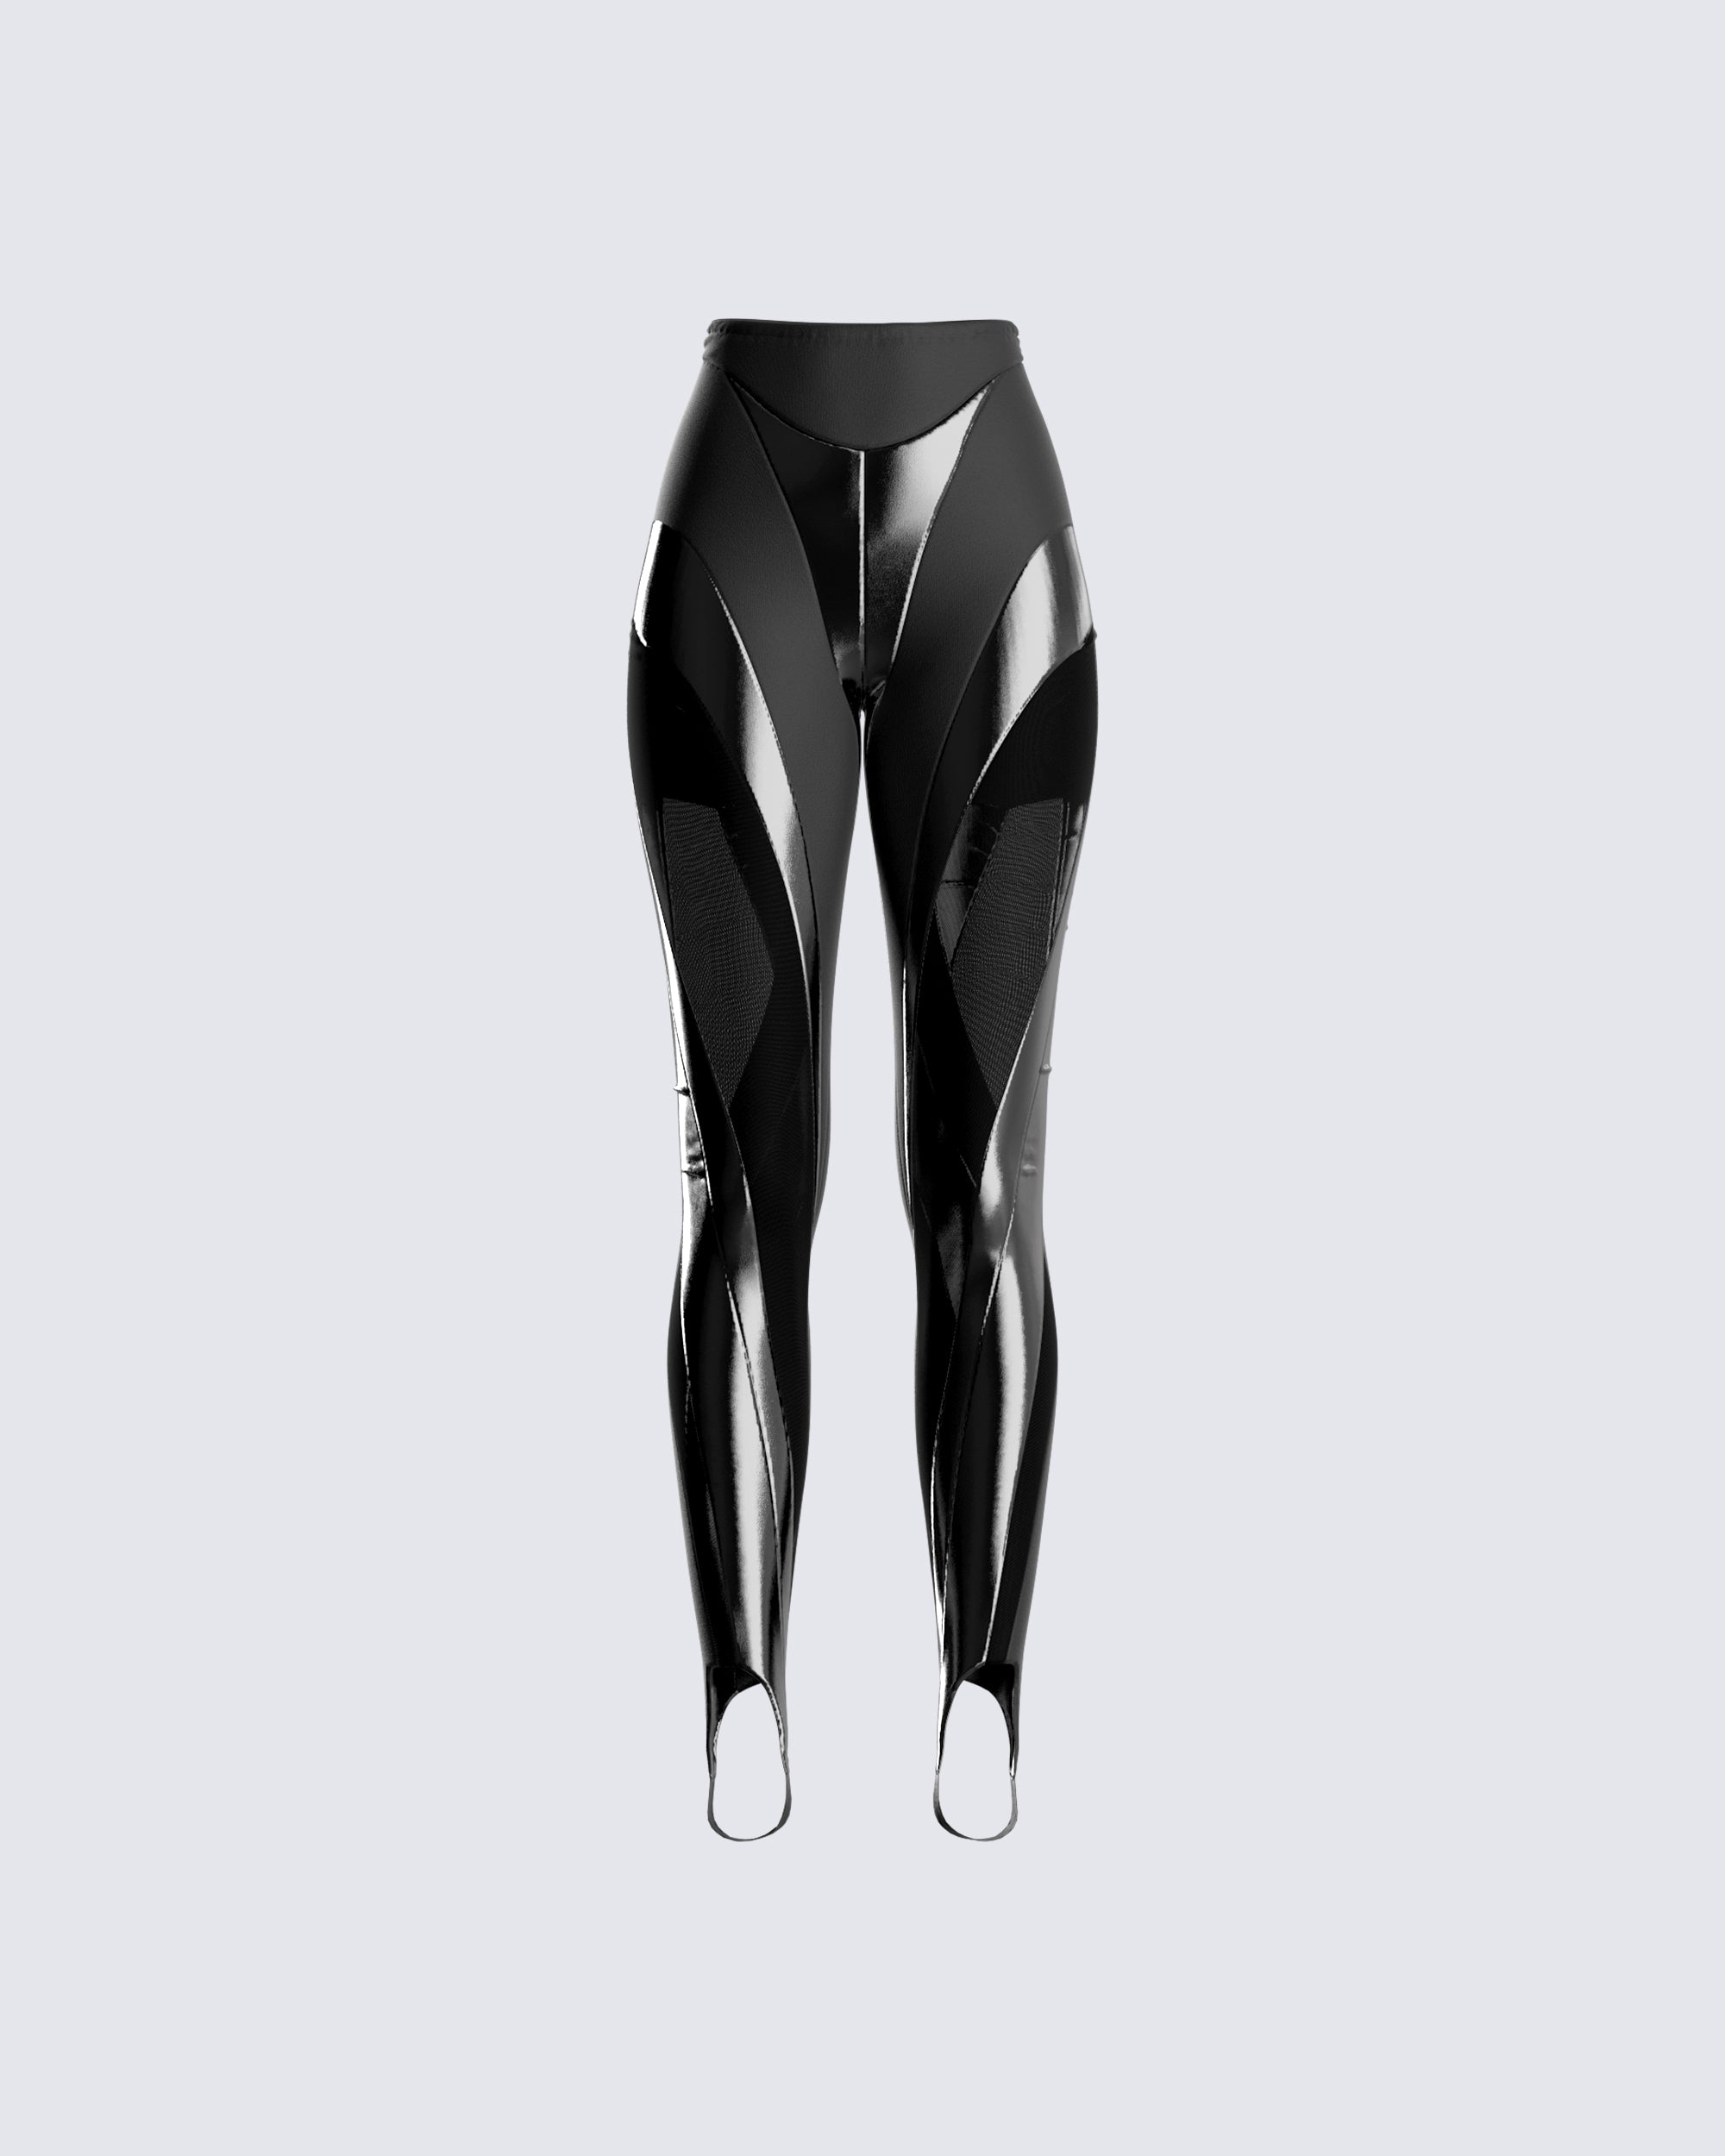 Black Carbon Fiber Leggings from All Good Laces